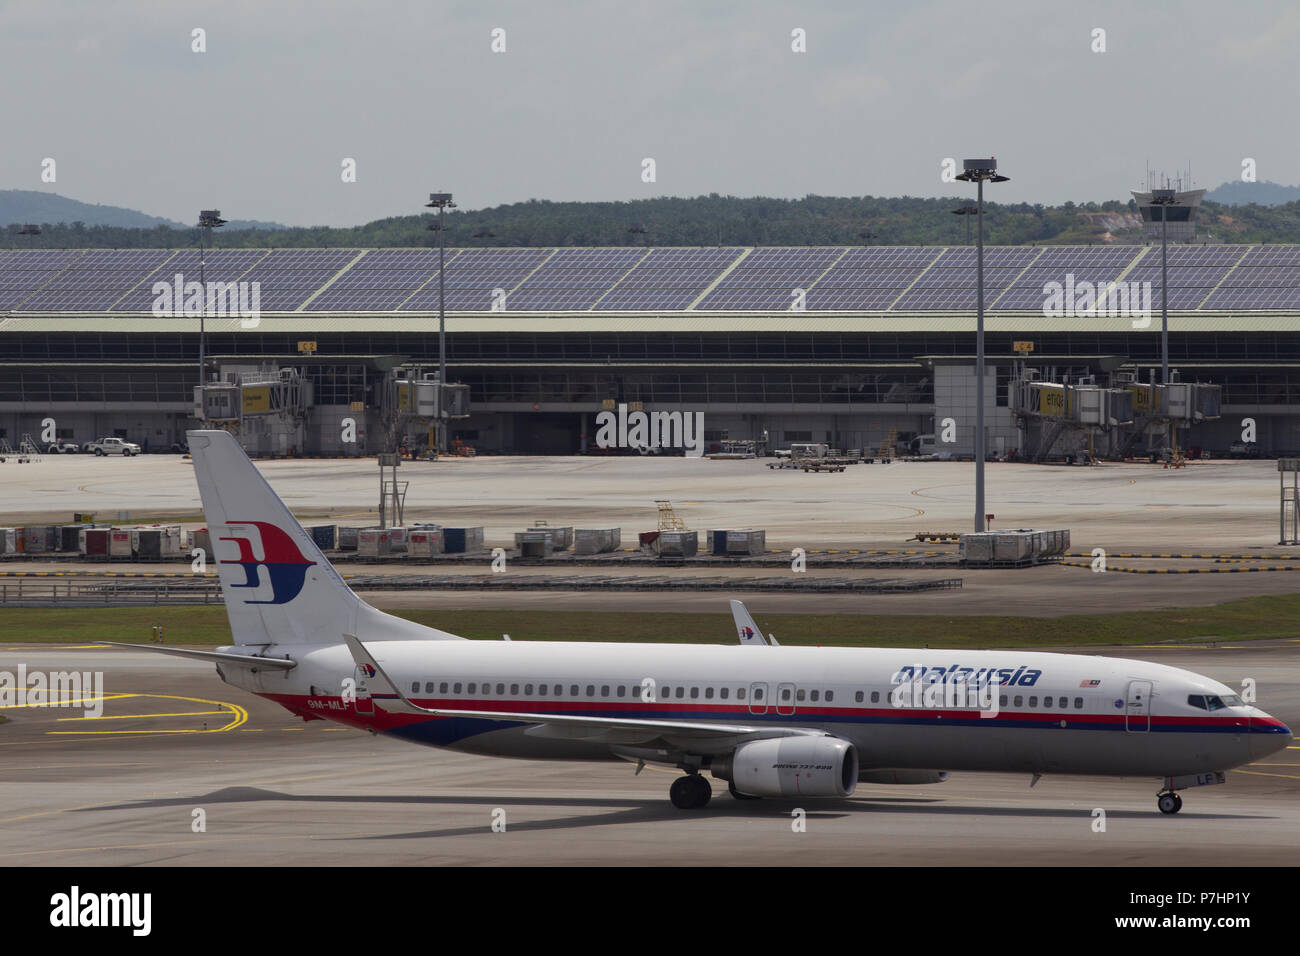 A Malaysian Airlines Boeing 737 taxis to the terminal building after landing at Kuala Lumpur International Airport in Malaysia. Stock Photo